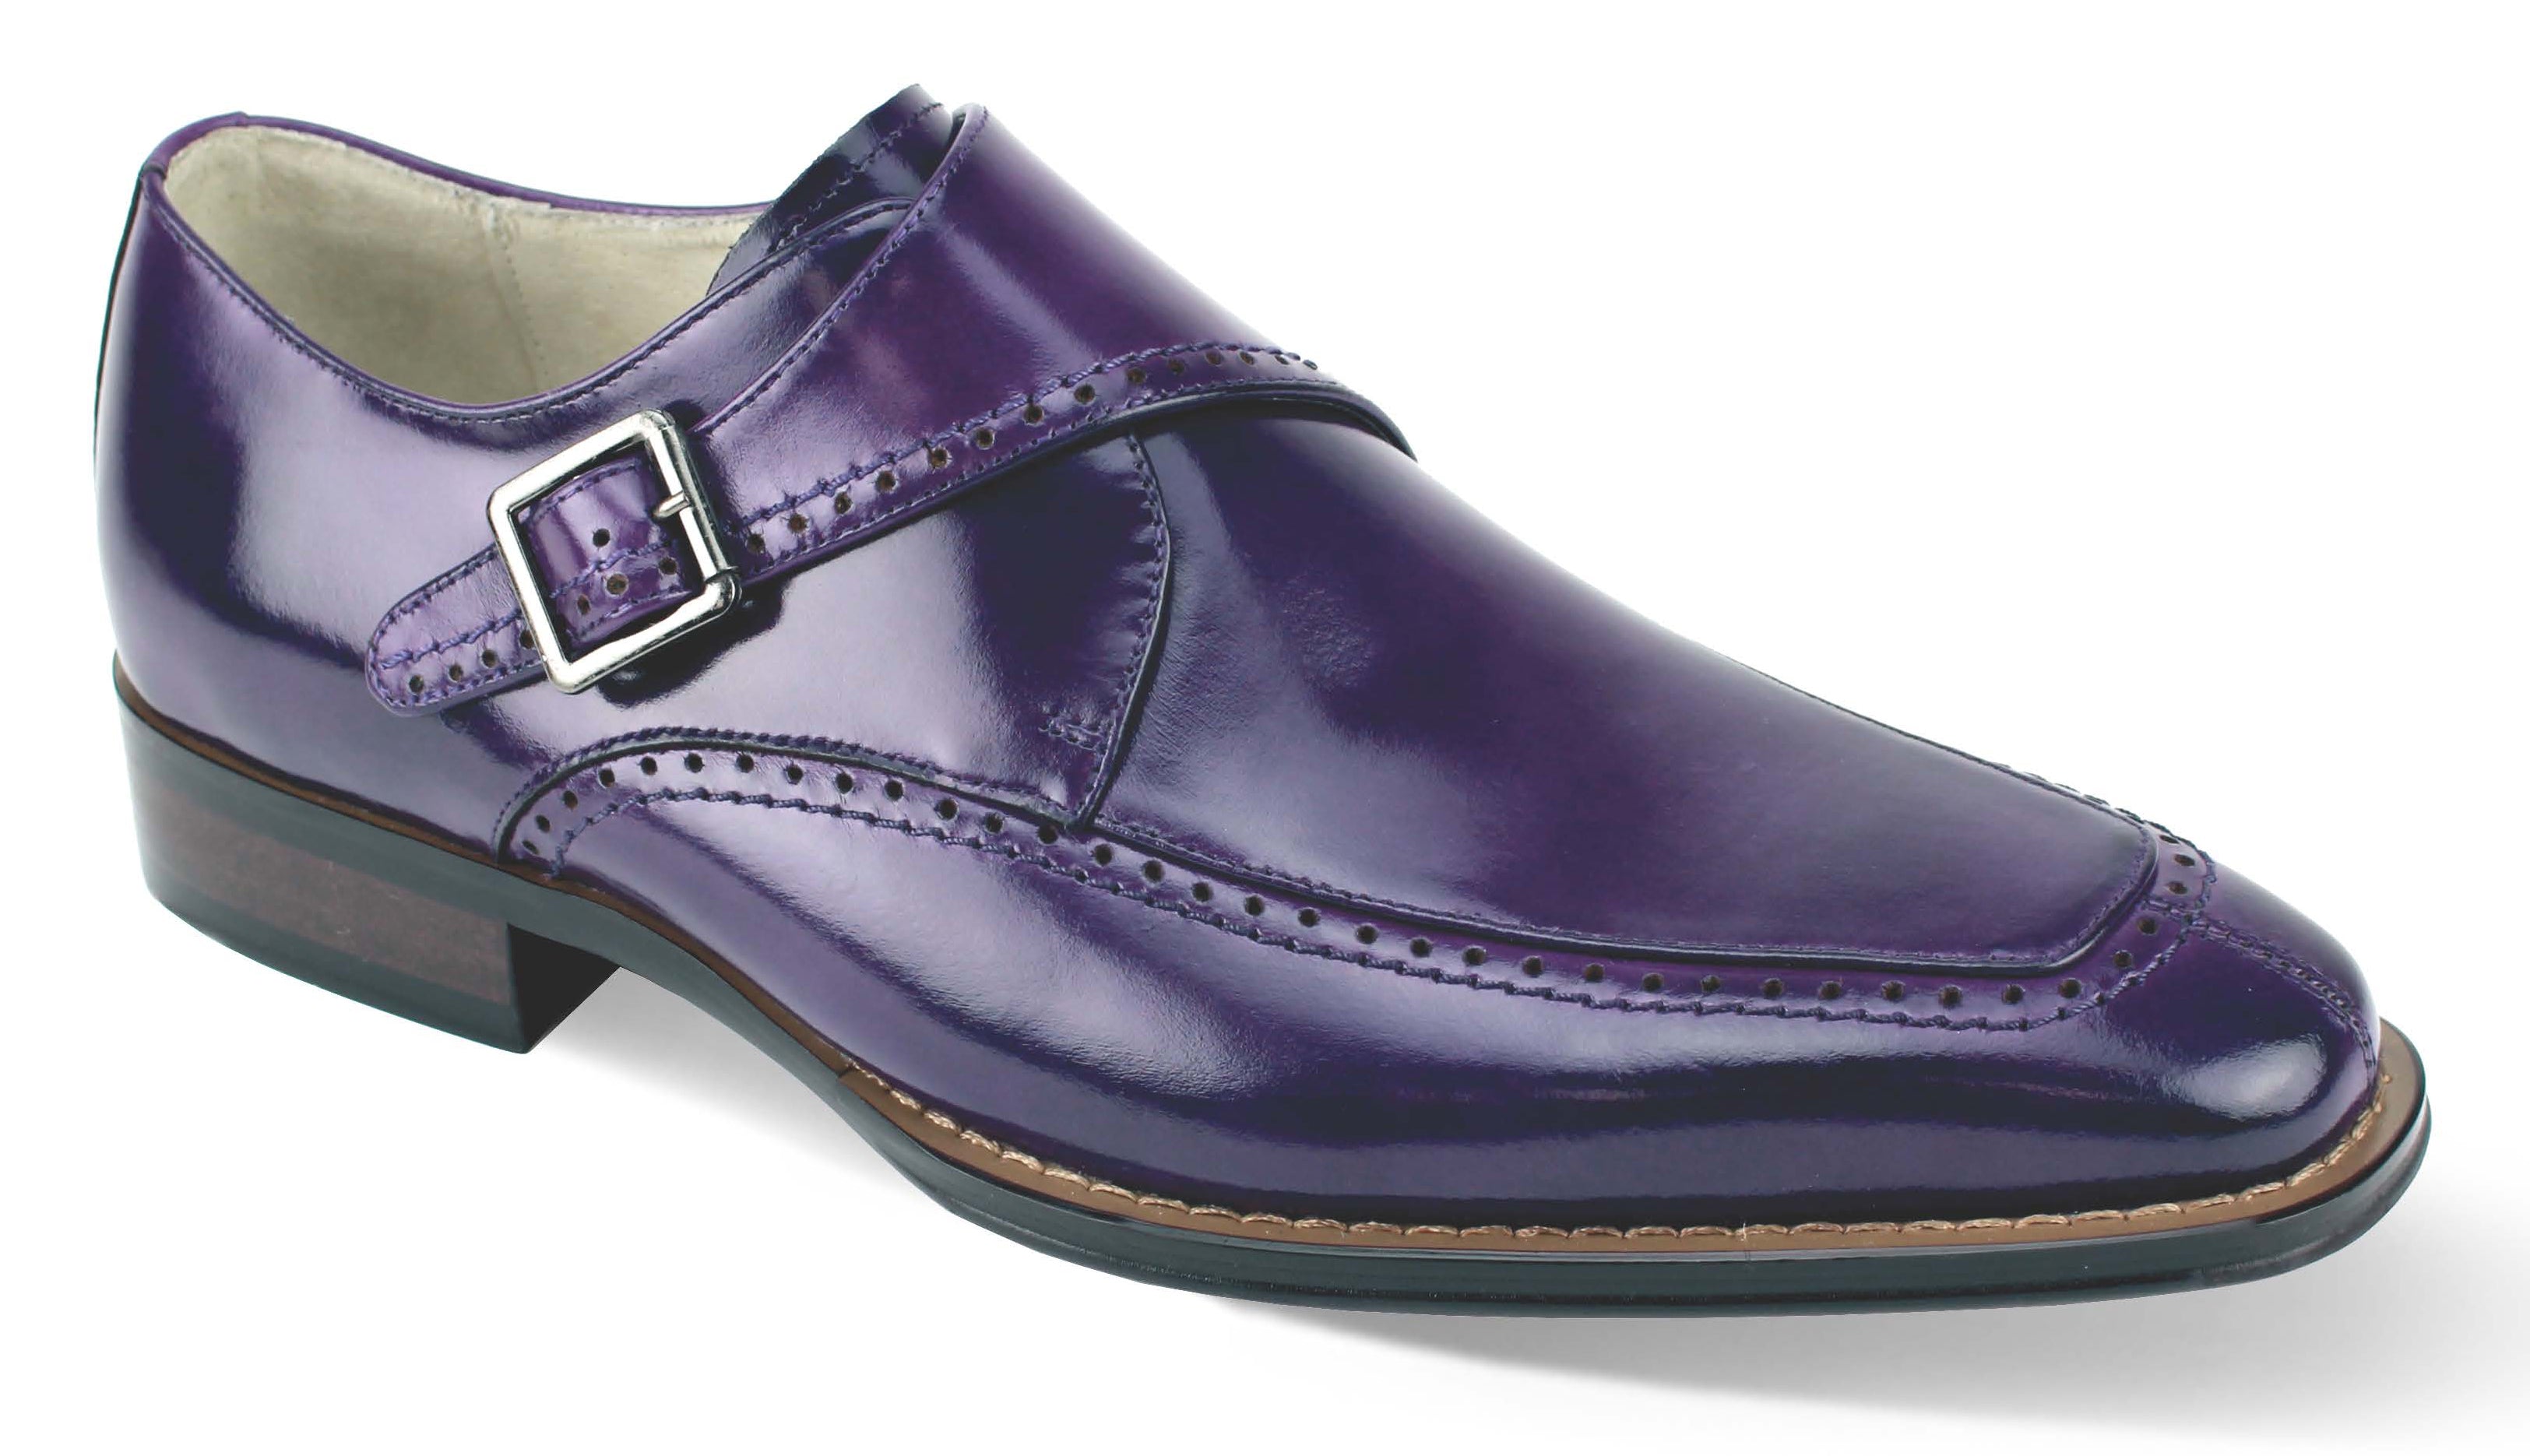 Giovani Slip On side Buckle Shoes